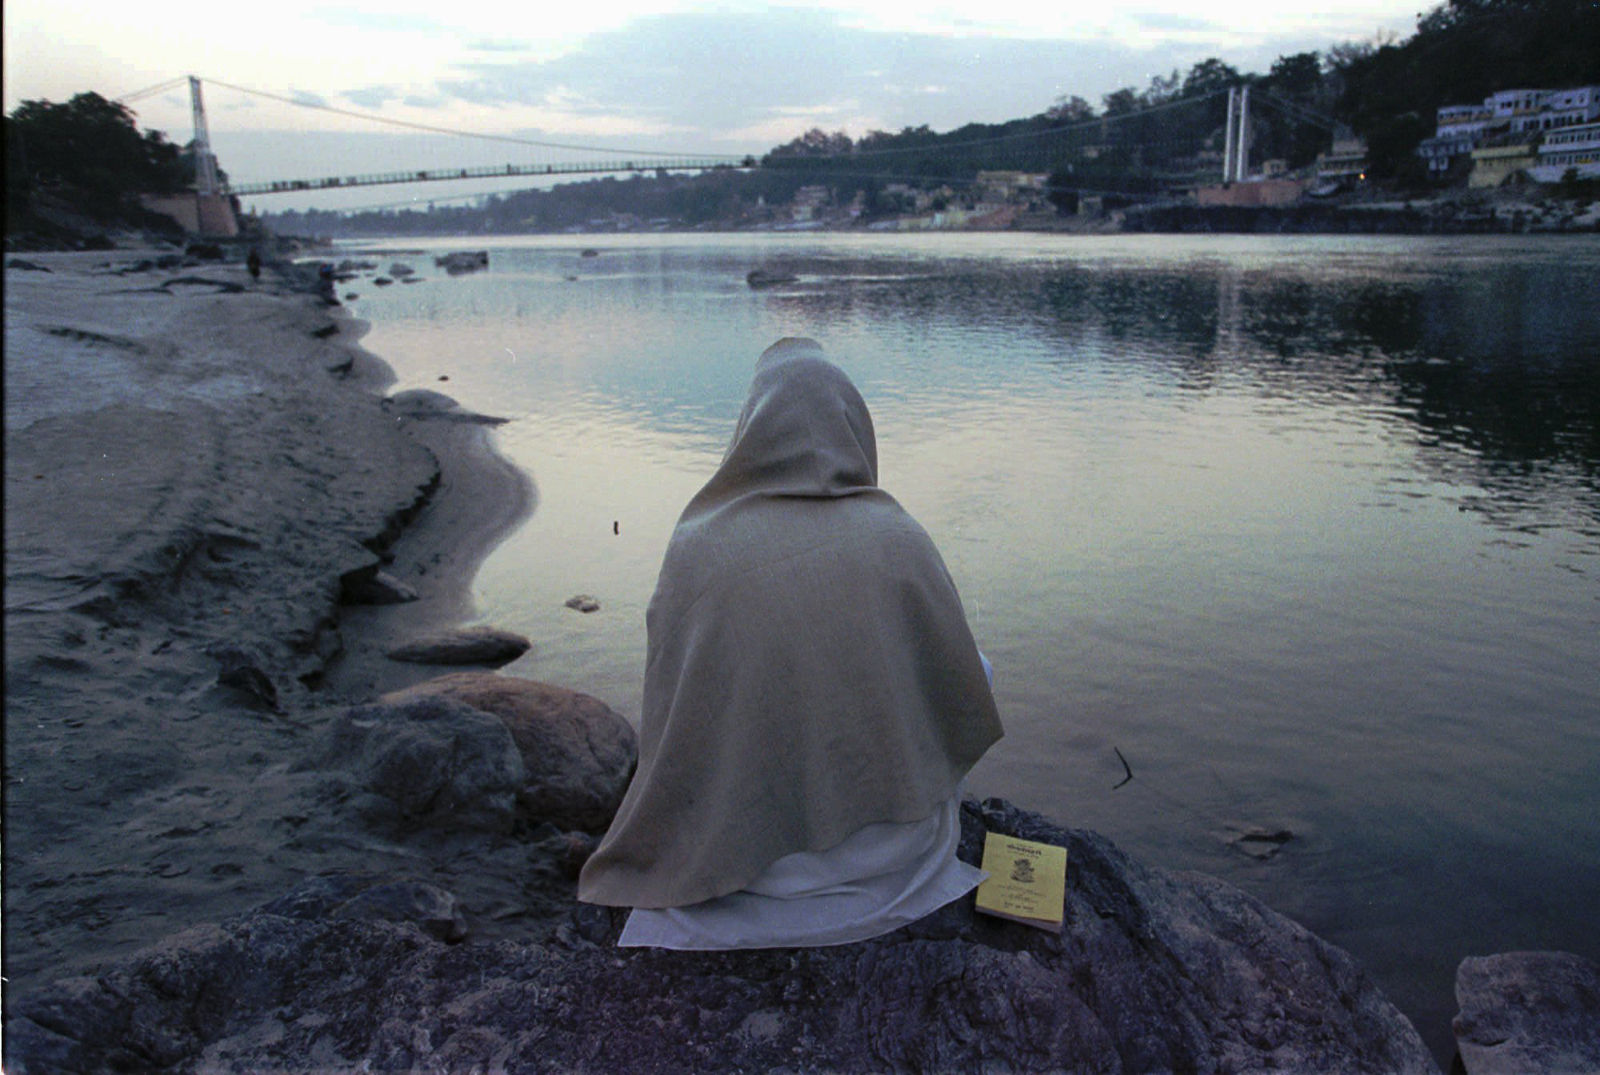 A Hindu pilgrim meditates along the bank of the Ganges River in Rishikesh Monday, January 22, 1996. The town of Rishikesh, located where the Ganges emerges from the foothills of the Himalayas, is considered holy by Hindus and is sometimes refered to as the "Yoga Capital of the World."(AP Photo/John Moore)